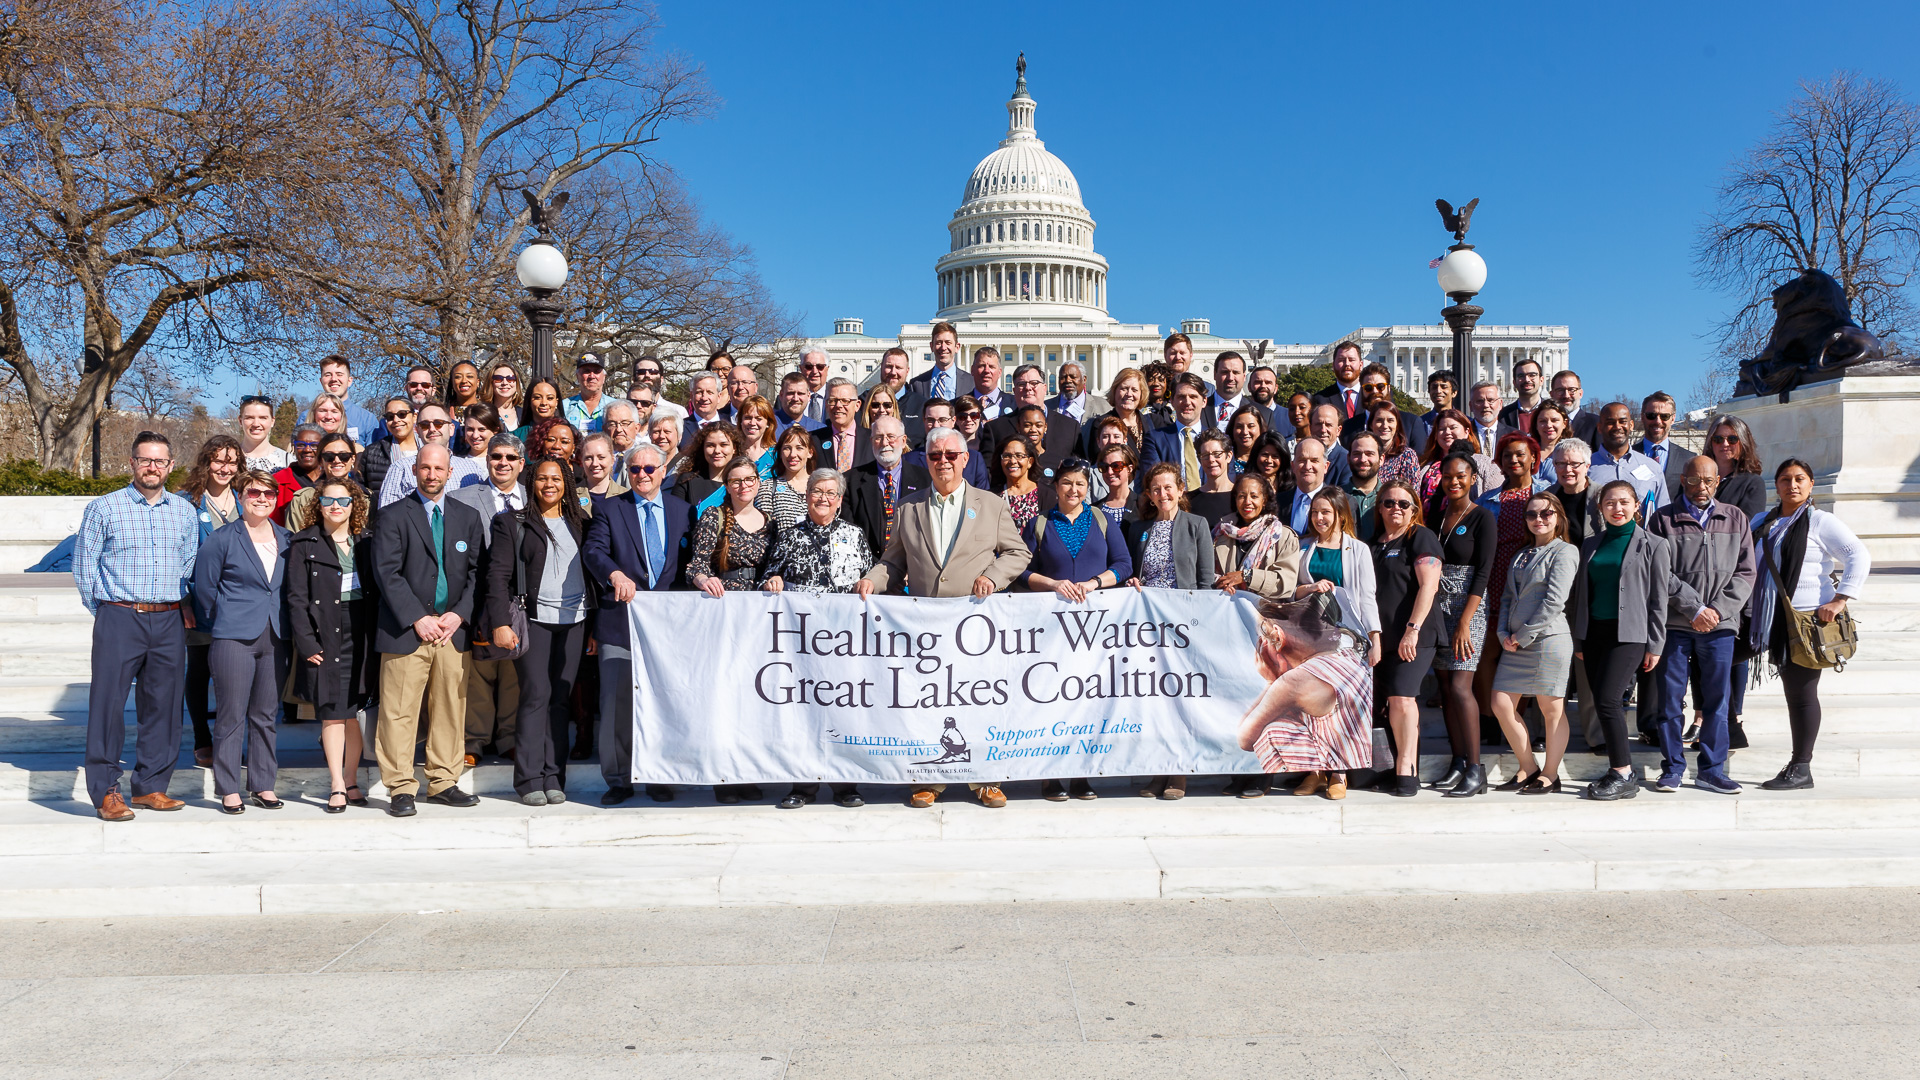 2020 Photo of Great Lakes Day attendees in front of the US Capitol 